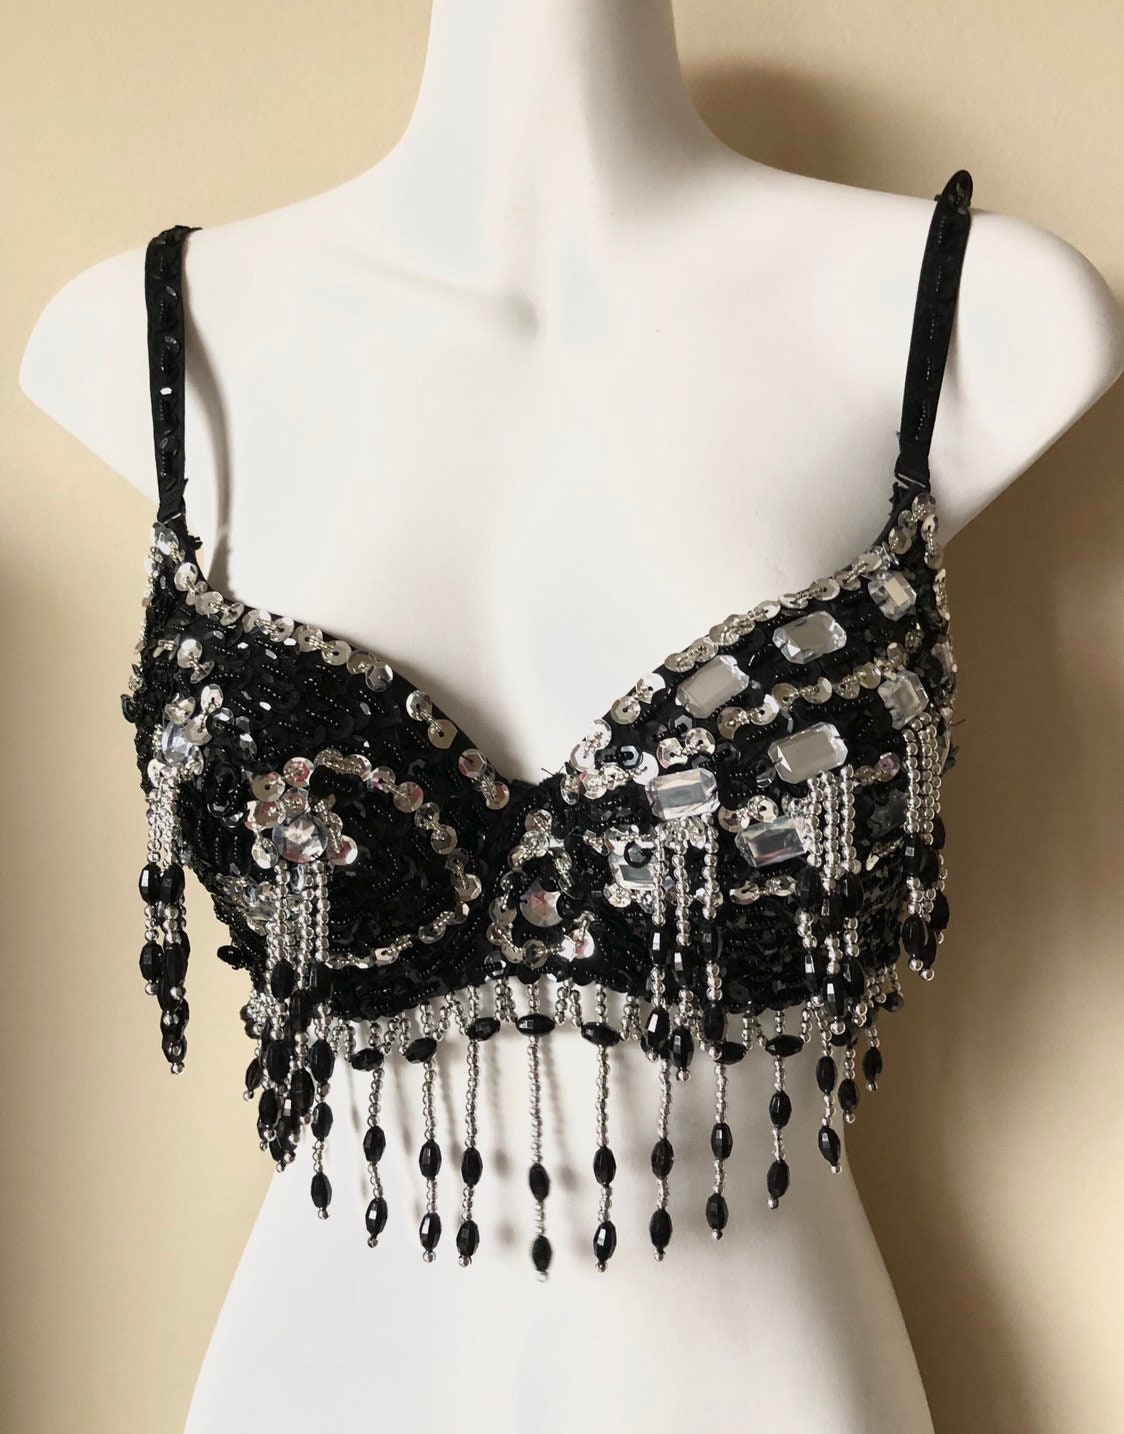 Belly Dance Sequin Beaded Hand Made Bra Top Black Silver 